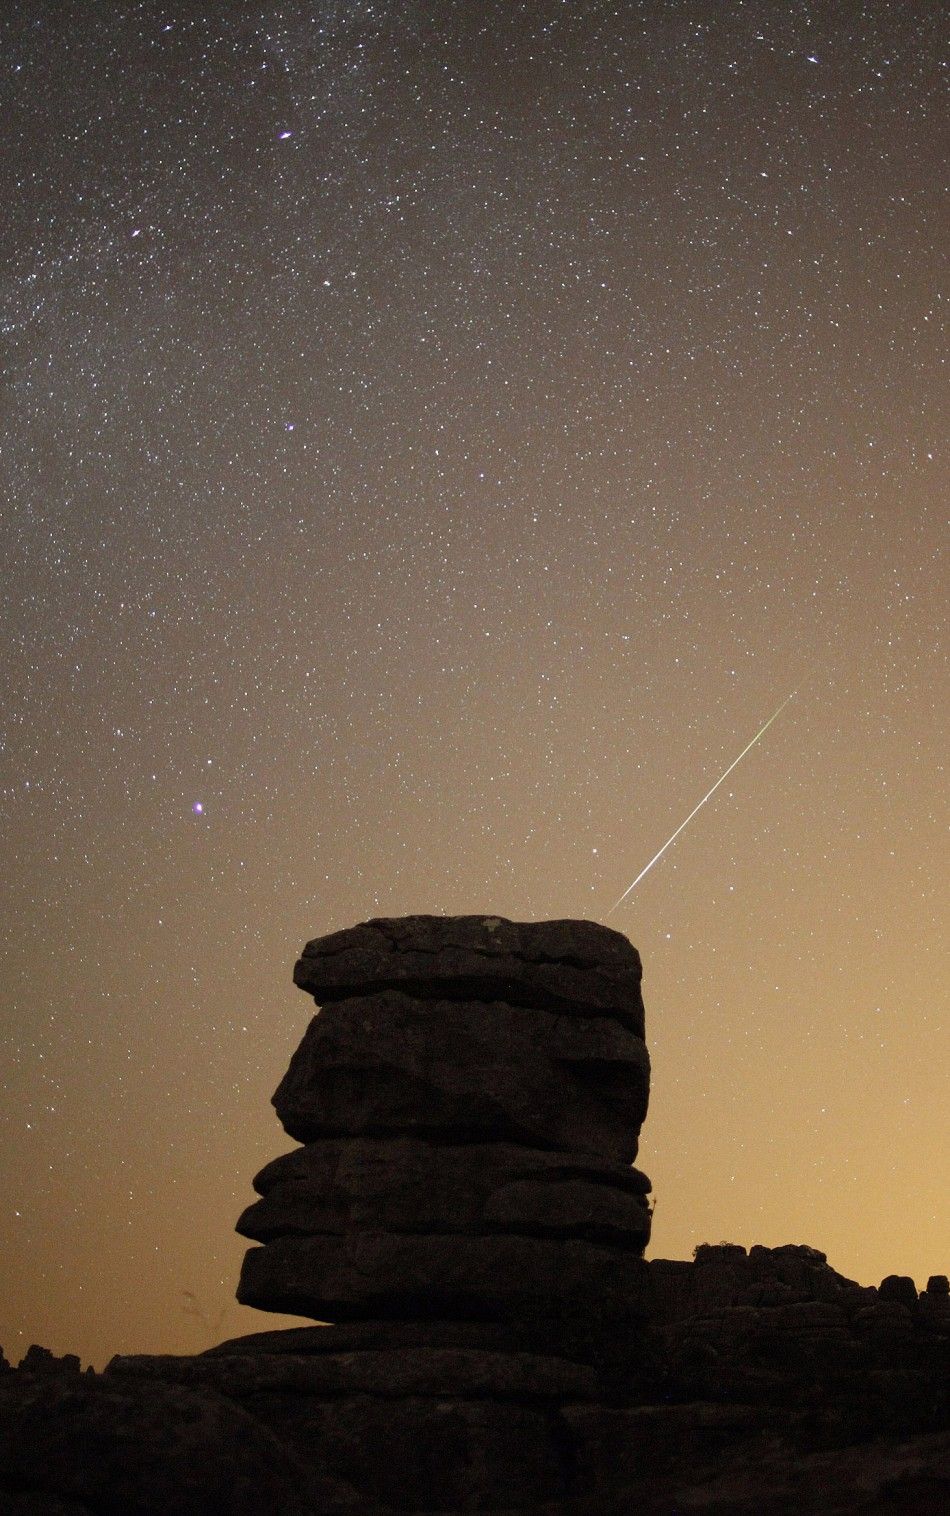 A meteor streaks past stars in the night sky over El Torcal nature park reserve in Antequera